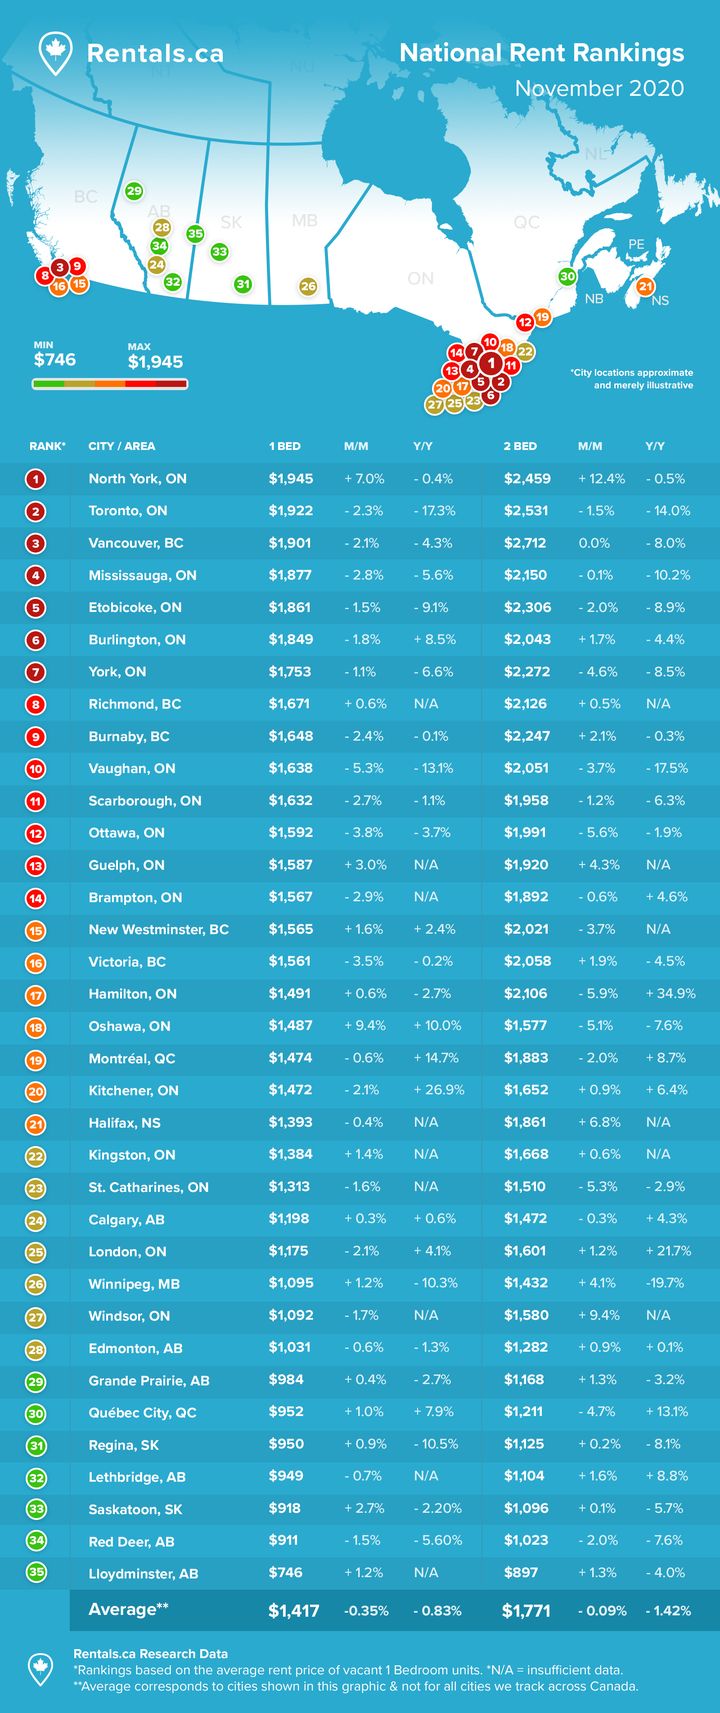 Rental rates have fallen in a majority of Canadian cities over the past year, as this chart from Rentals.ca shows.